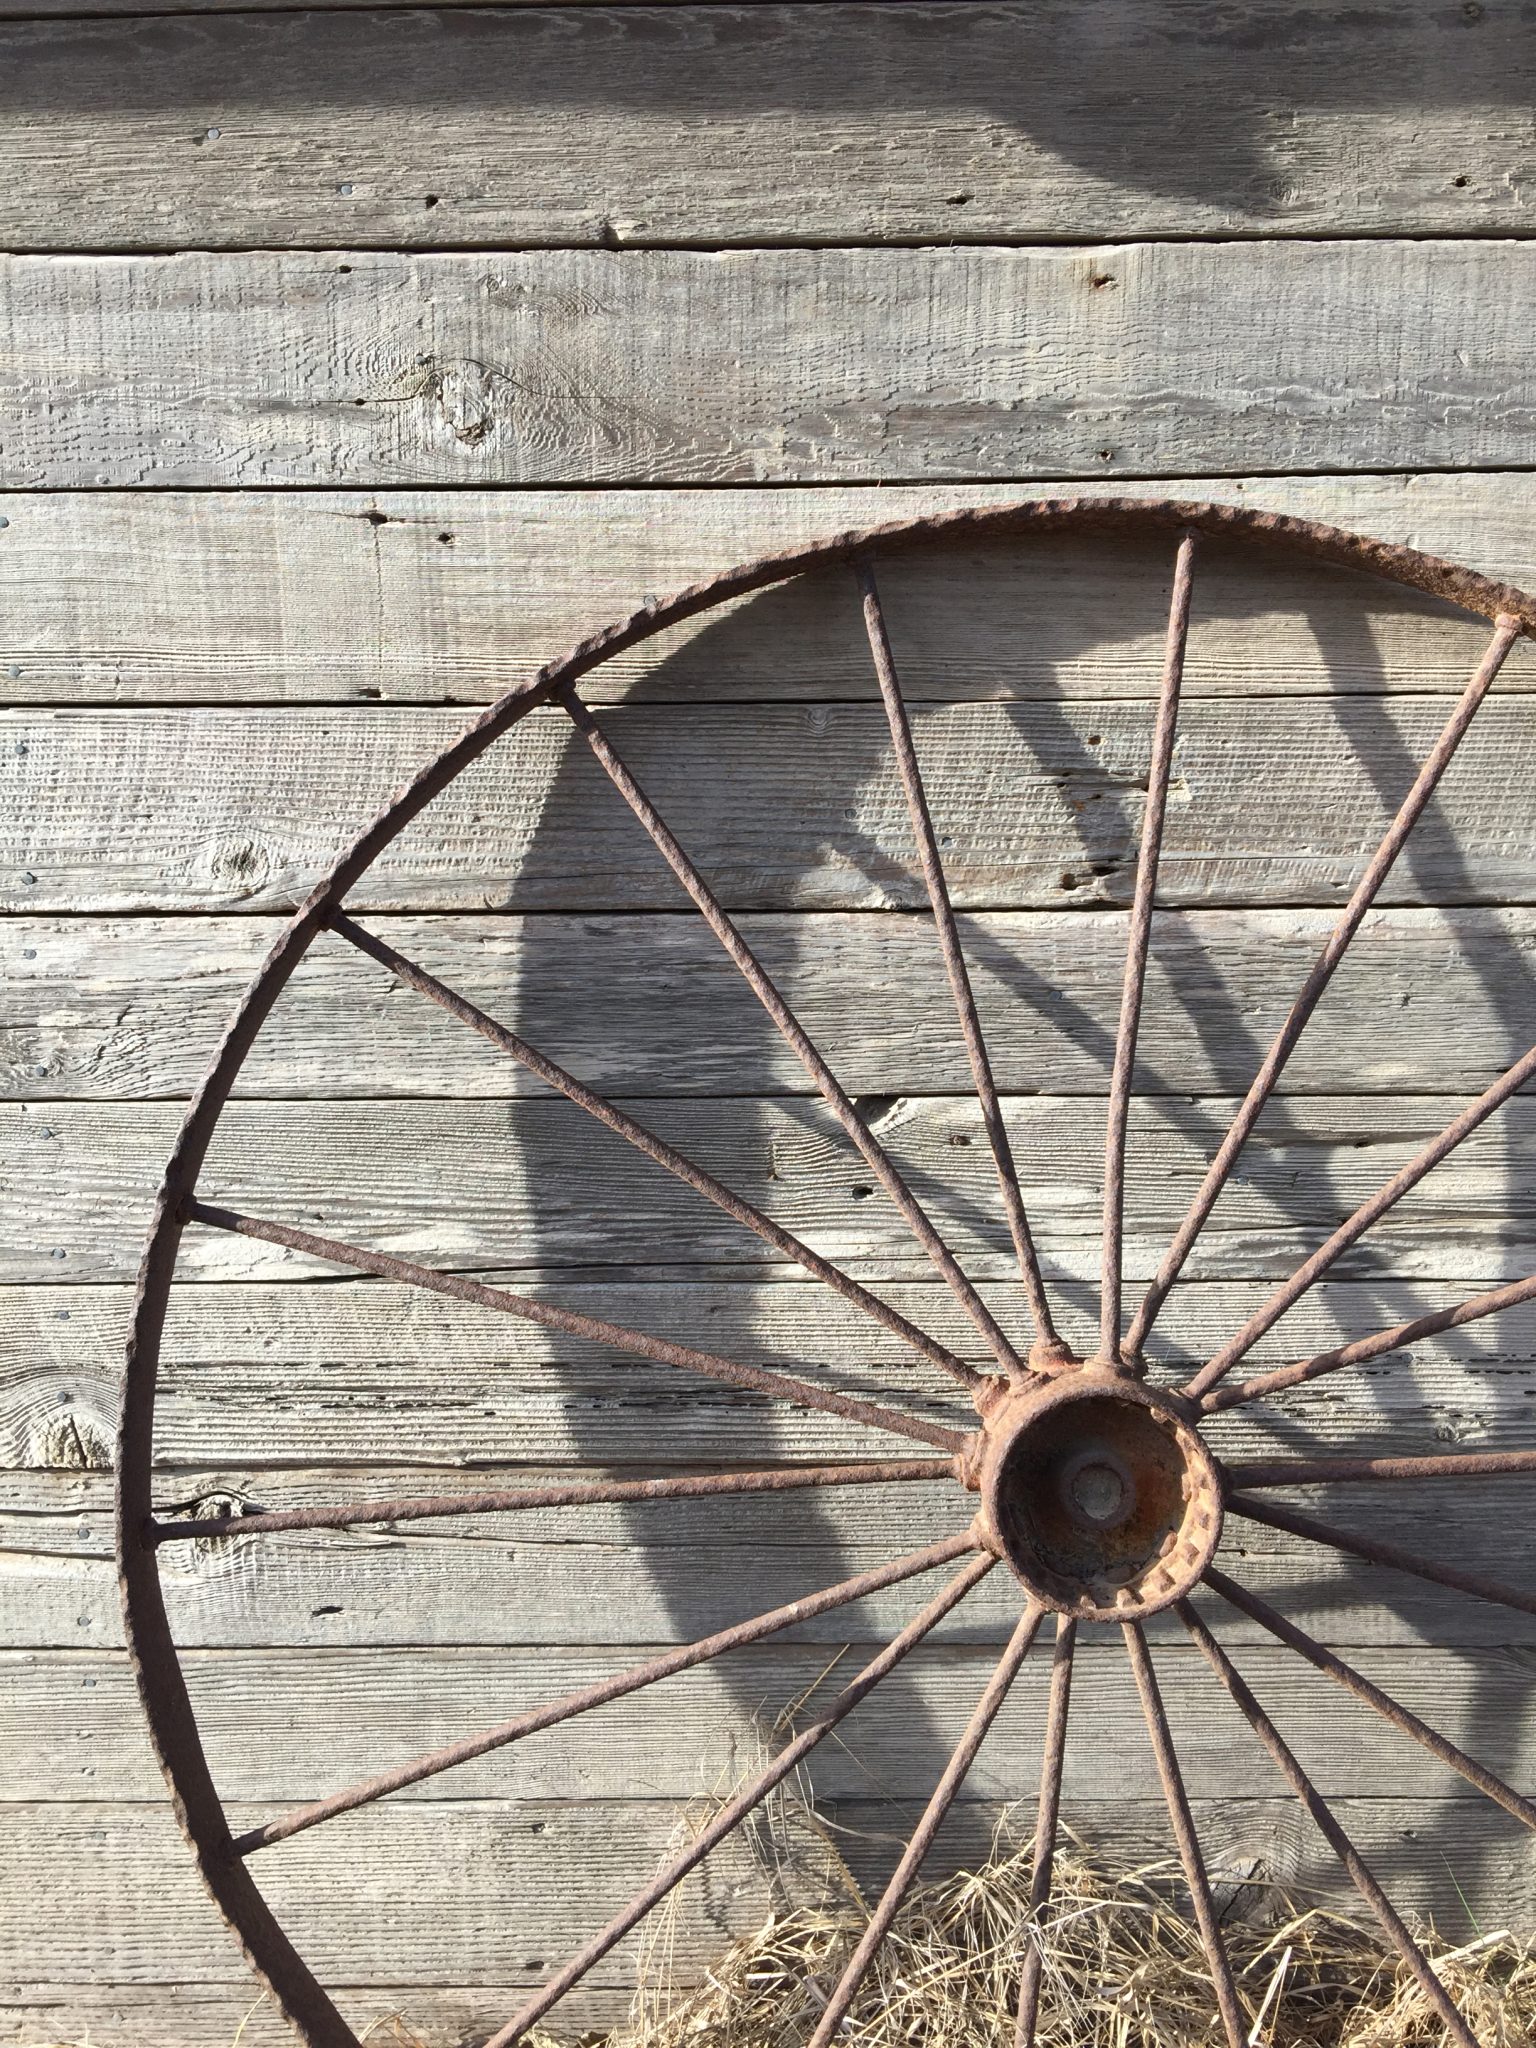 Metal wagon wheel against an old country barn wall